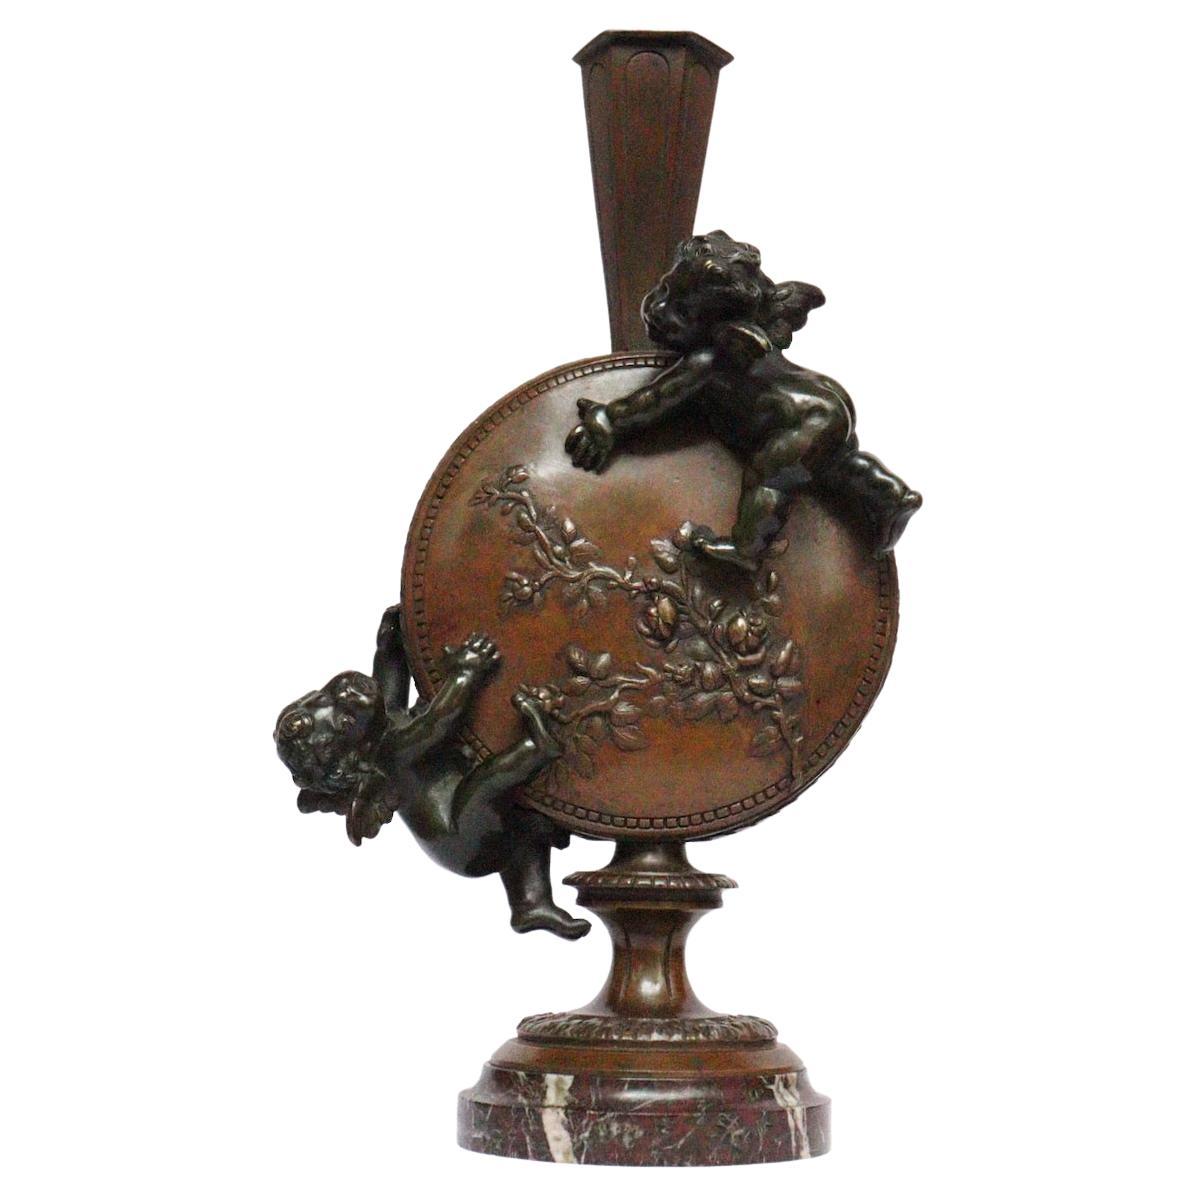 A French patinated bronze flask-shaped vase by Auguste Moreau (1834-1917)
Cast in high relief with cloud putti, both faces with bunch of flowers, Inscribed Auguste Moreau
On a spreading circular marble foot
Cast from a model by Auguste Moreau